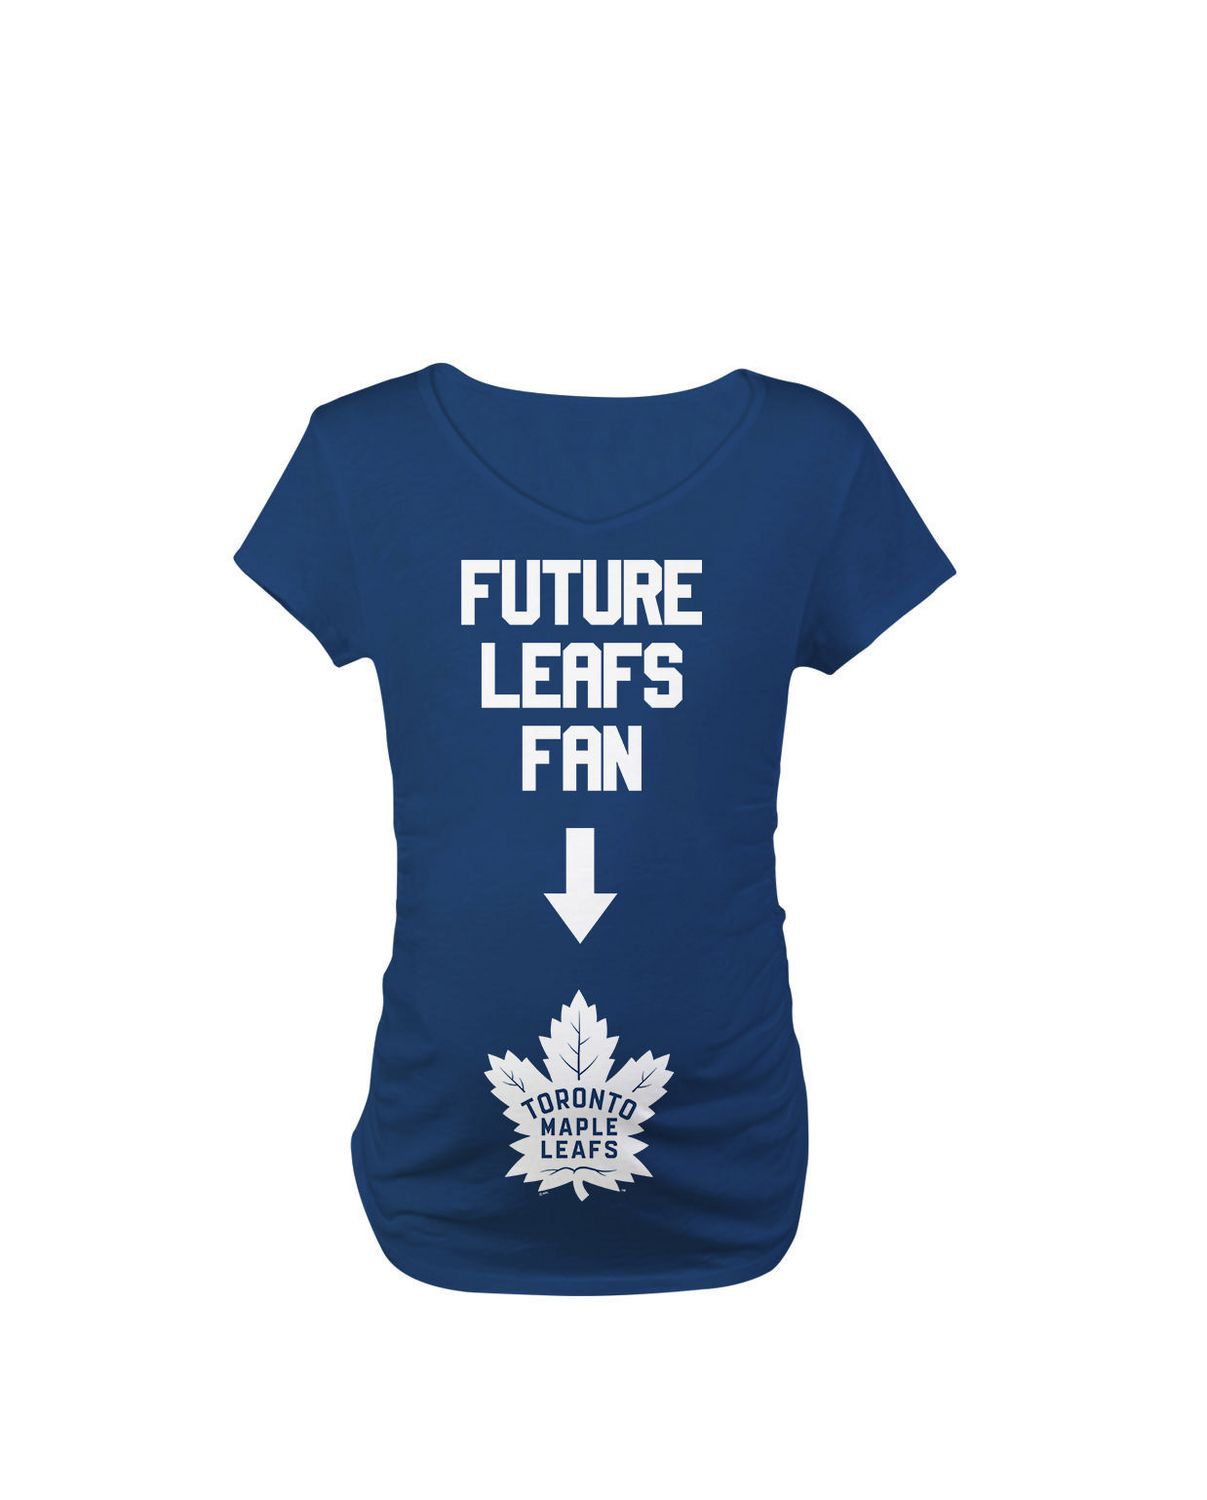 The Leafs Are Why I Drink - Toronto Maple Leafs T-Shirt - Funny and  Self-Deprecating Shirt For True Fans (Sizes S - 3XL) - …